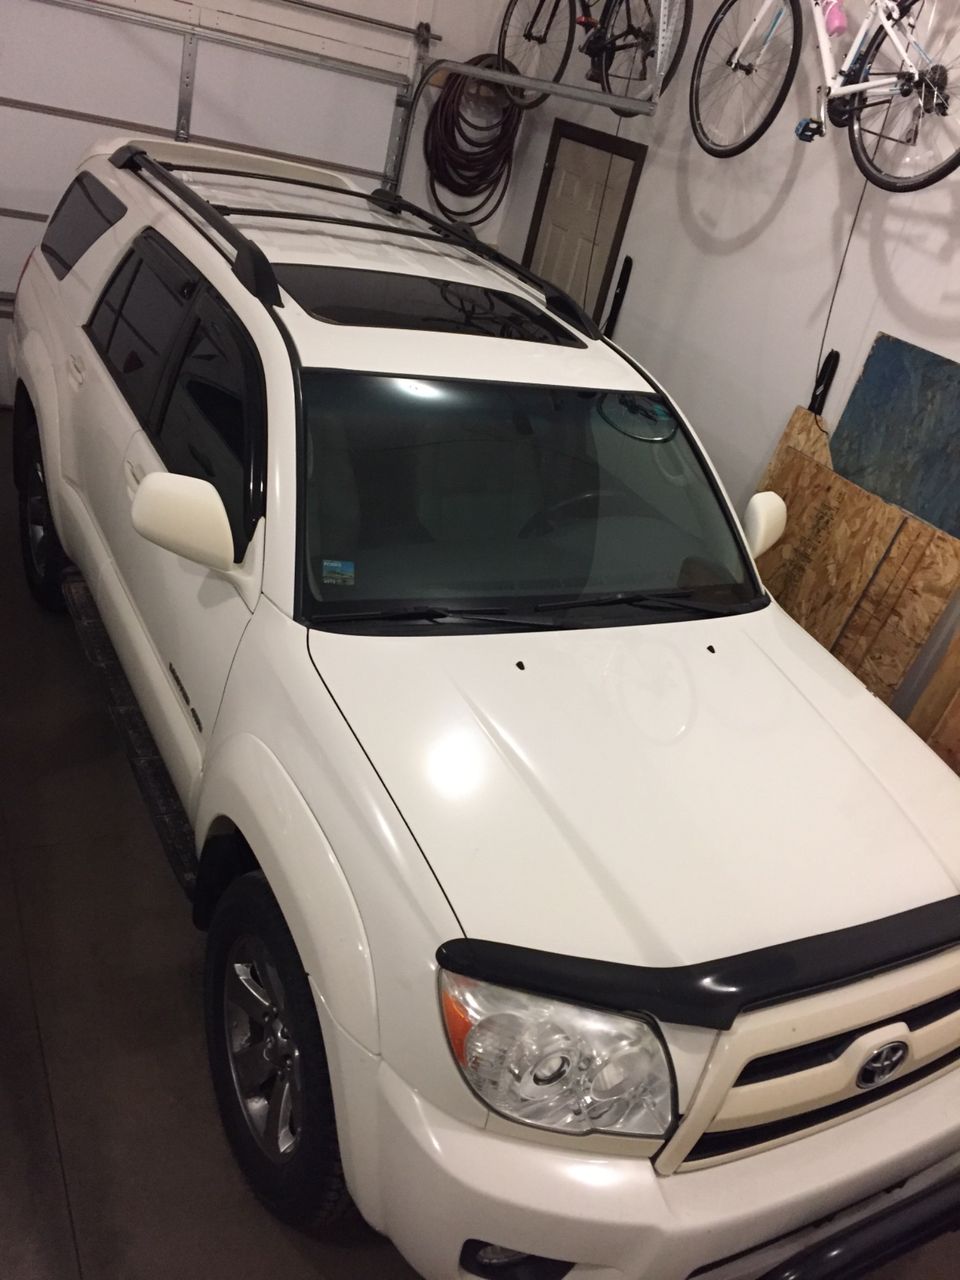 2006 Toyota 4Runner Limited | Sioux Falls, SD, Natural White (White), 4 Wheel